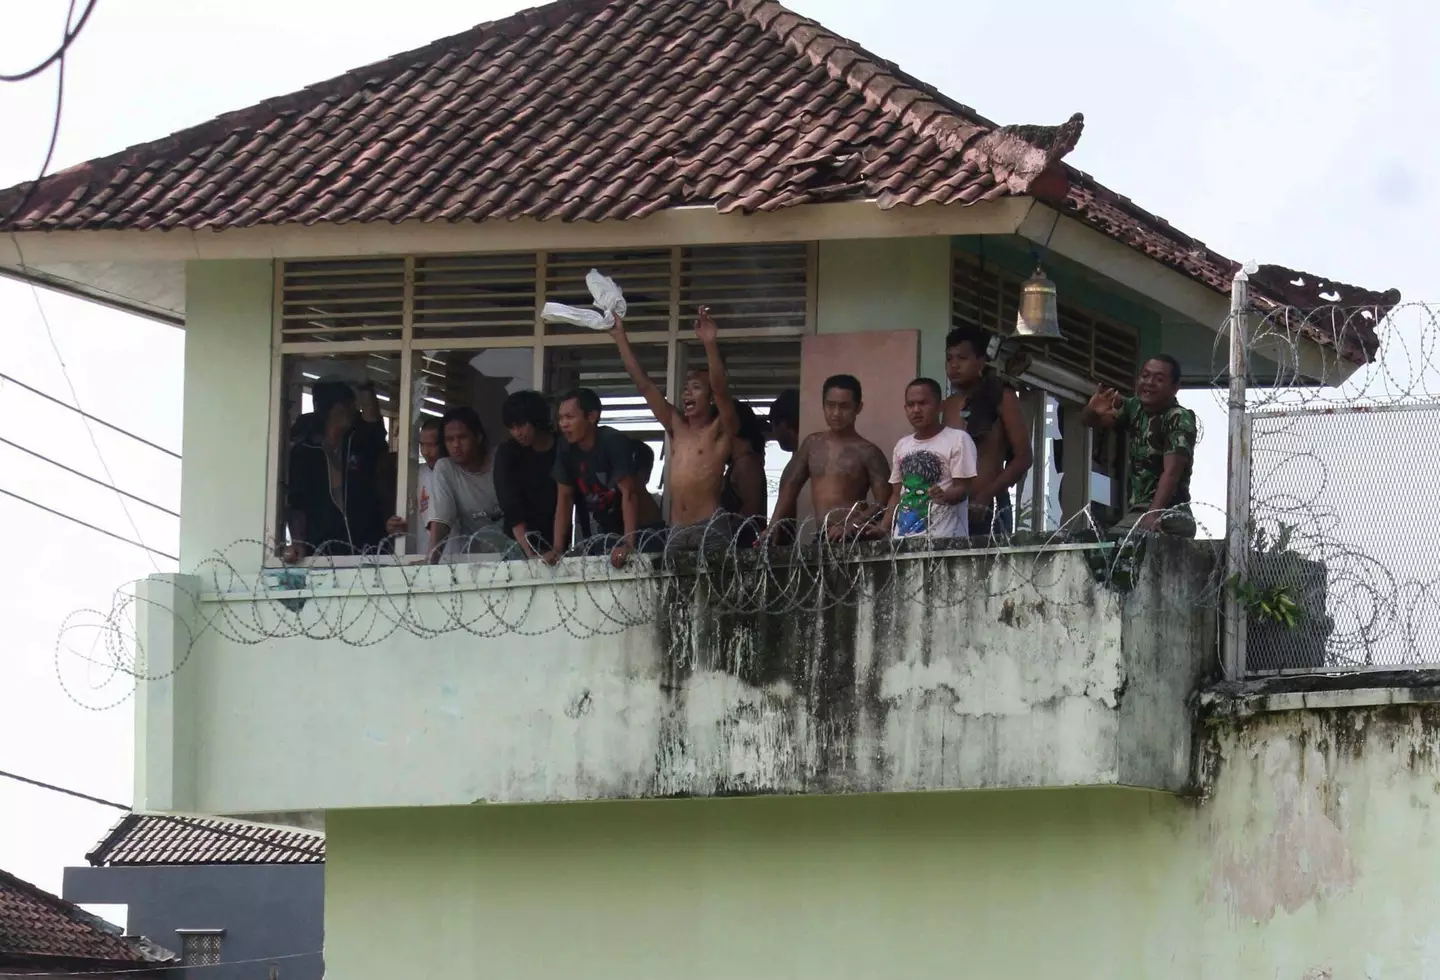 The Brit has spent most of the past decade at Kerobokan prison, a dangerous facility which has been the site of several riots in recent years.